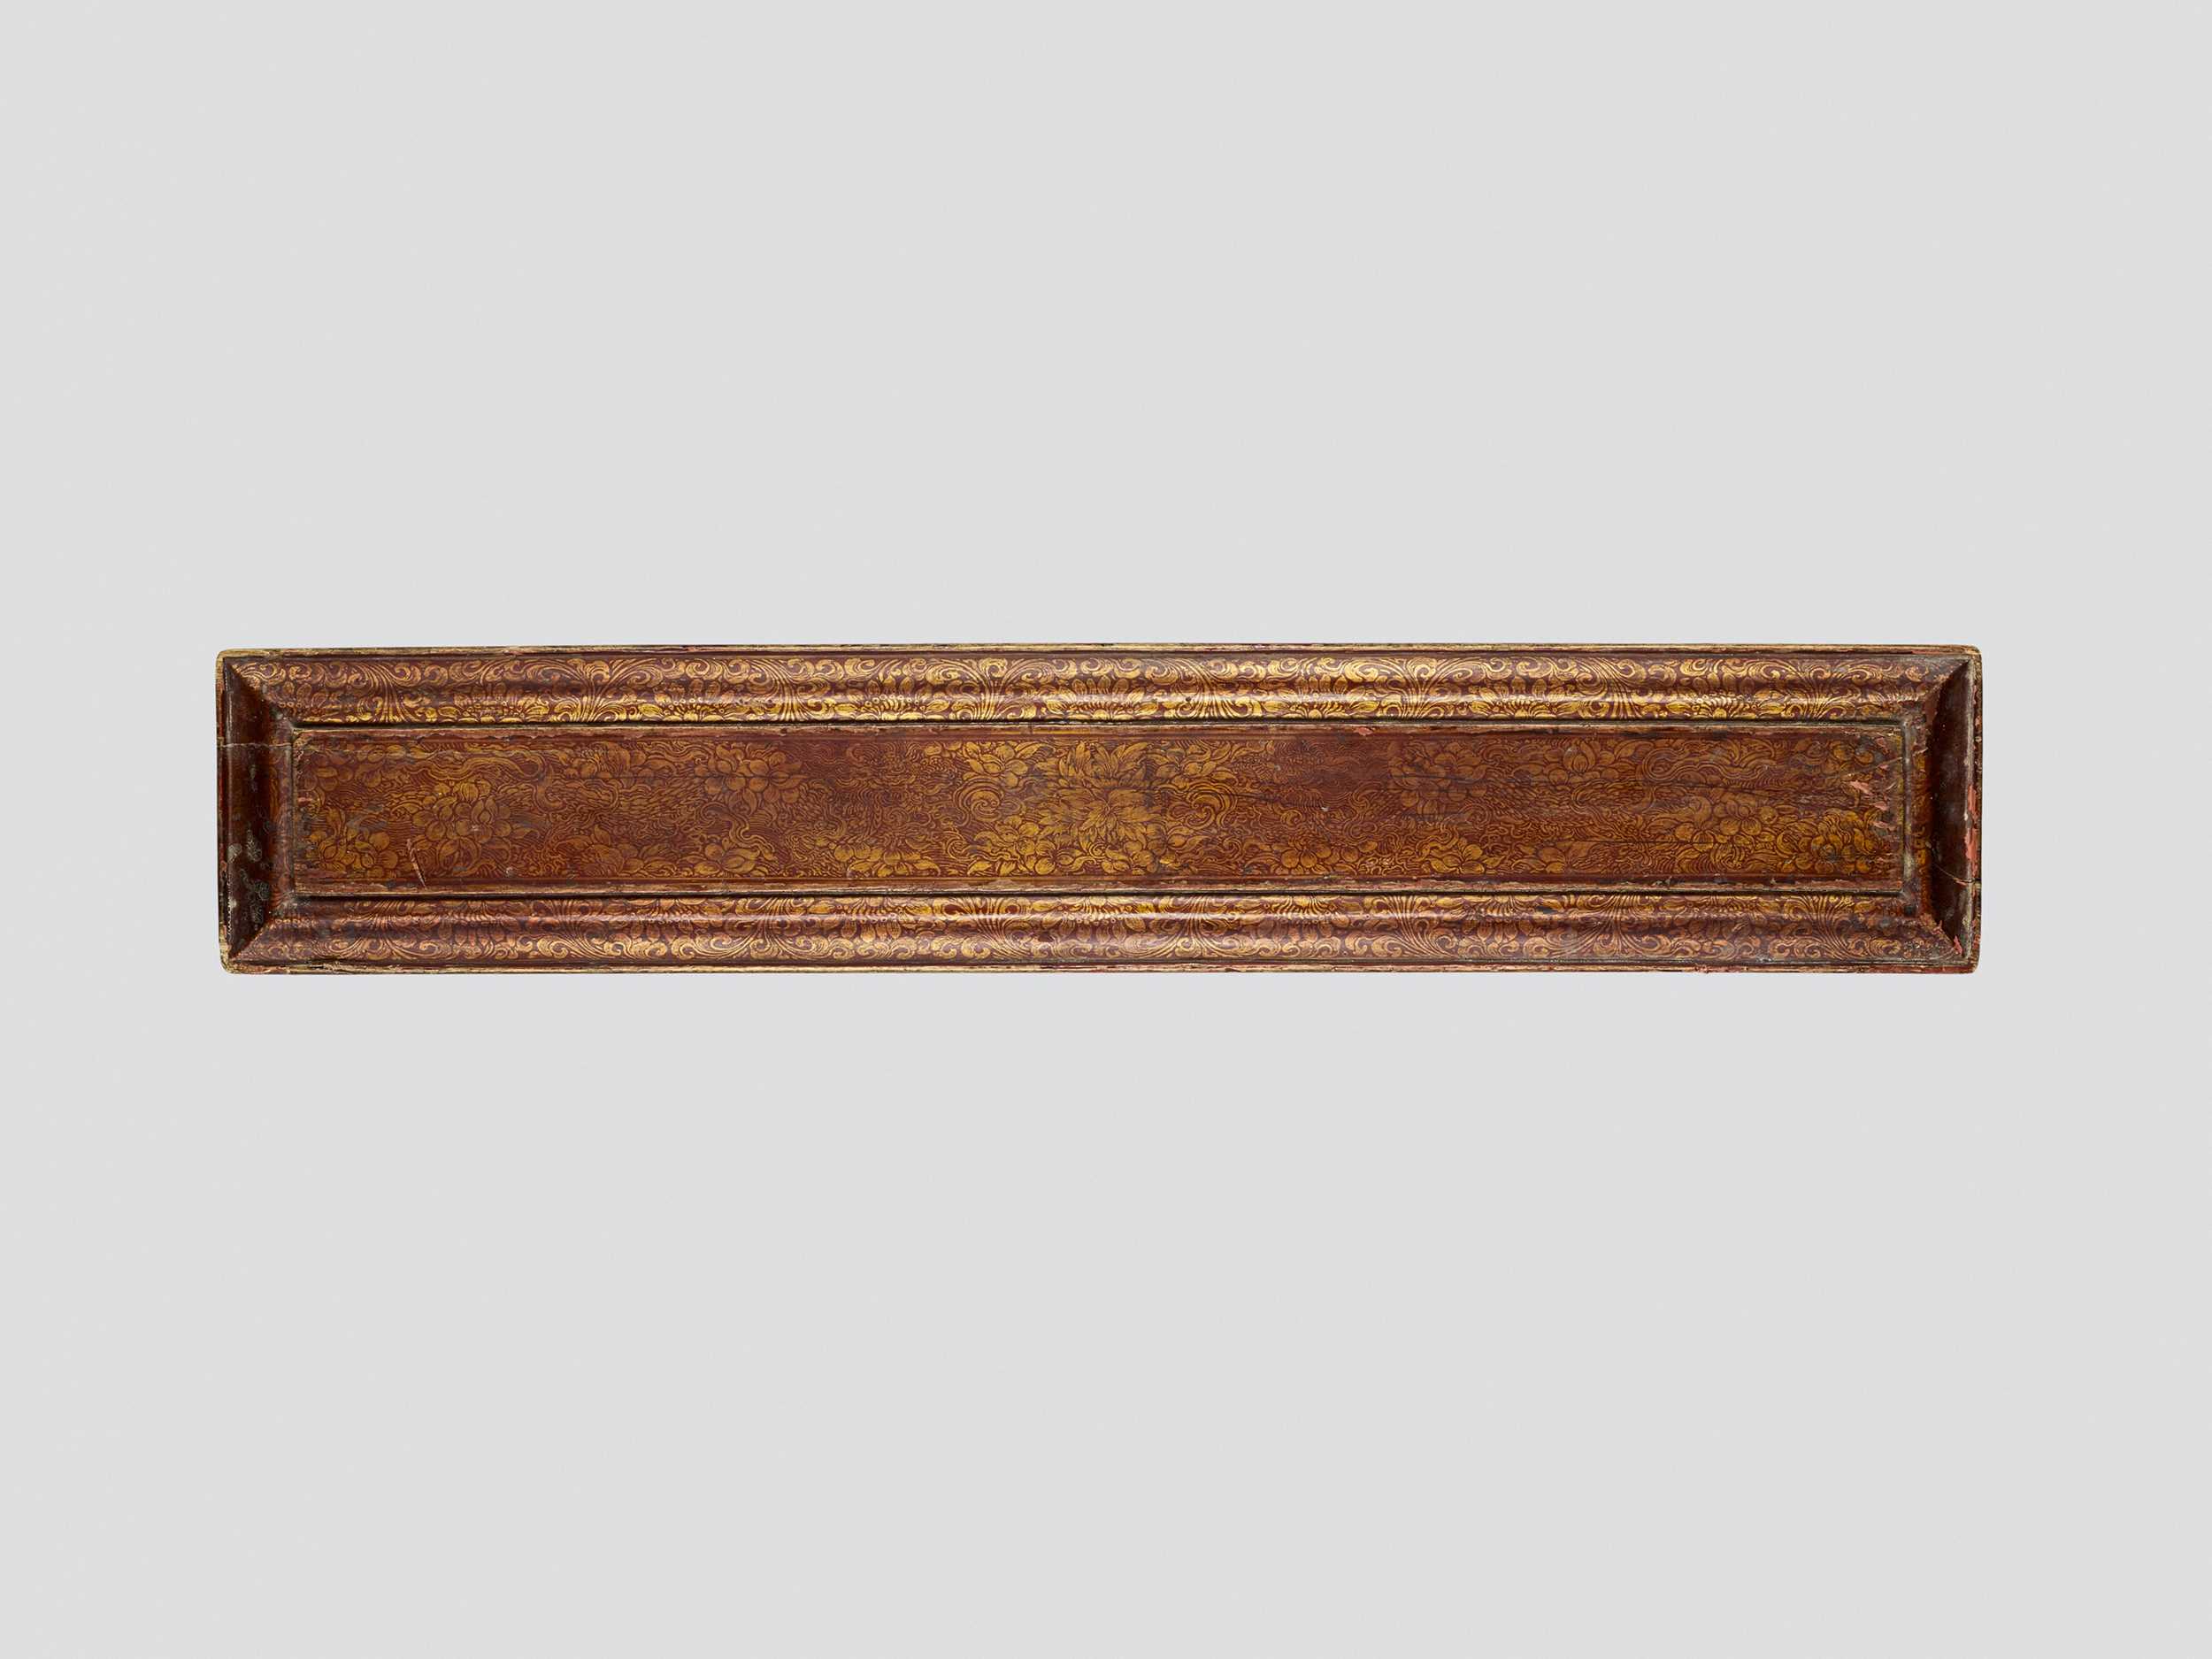 Lot 1326 - A CARVED AND LACQUERED WOOD MANUSCRIPT COVER, 19TH CENTURY